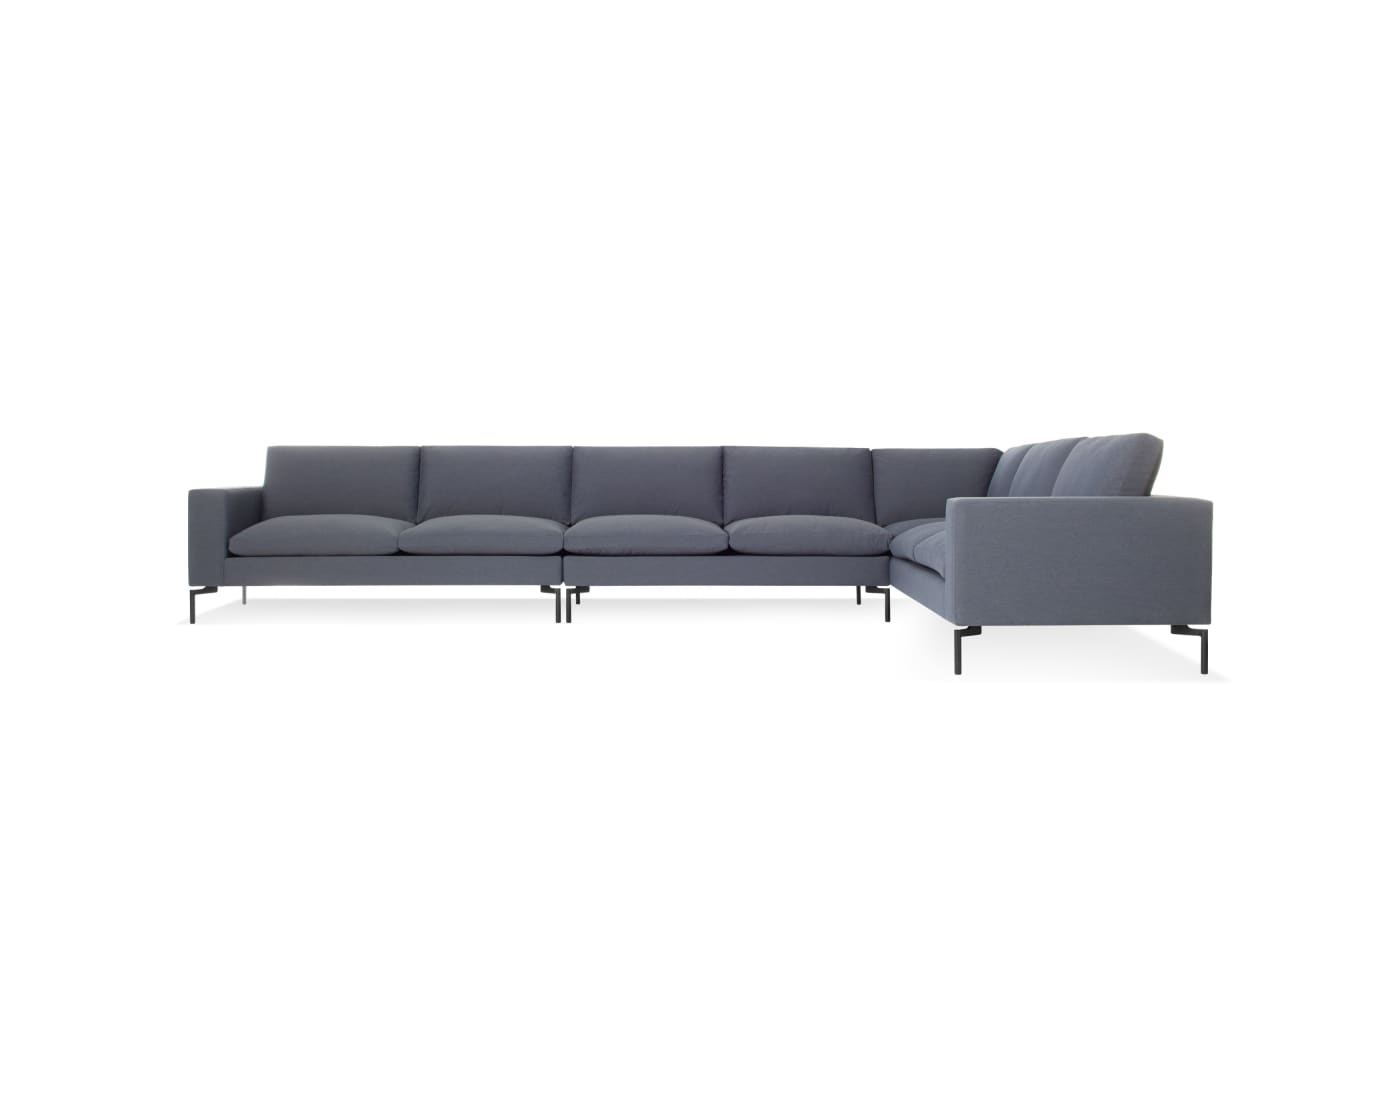 New Standard Sectional Sofa - Large